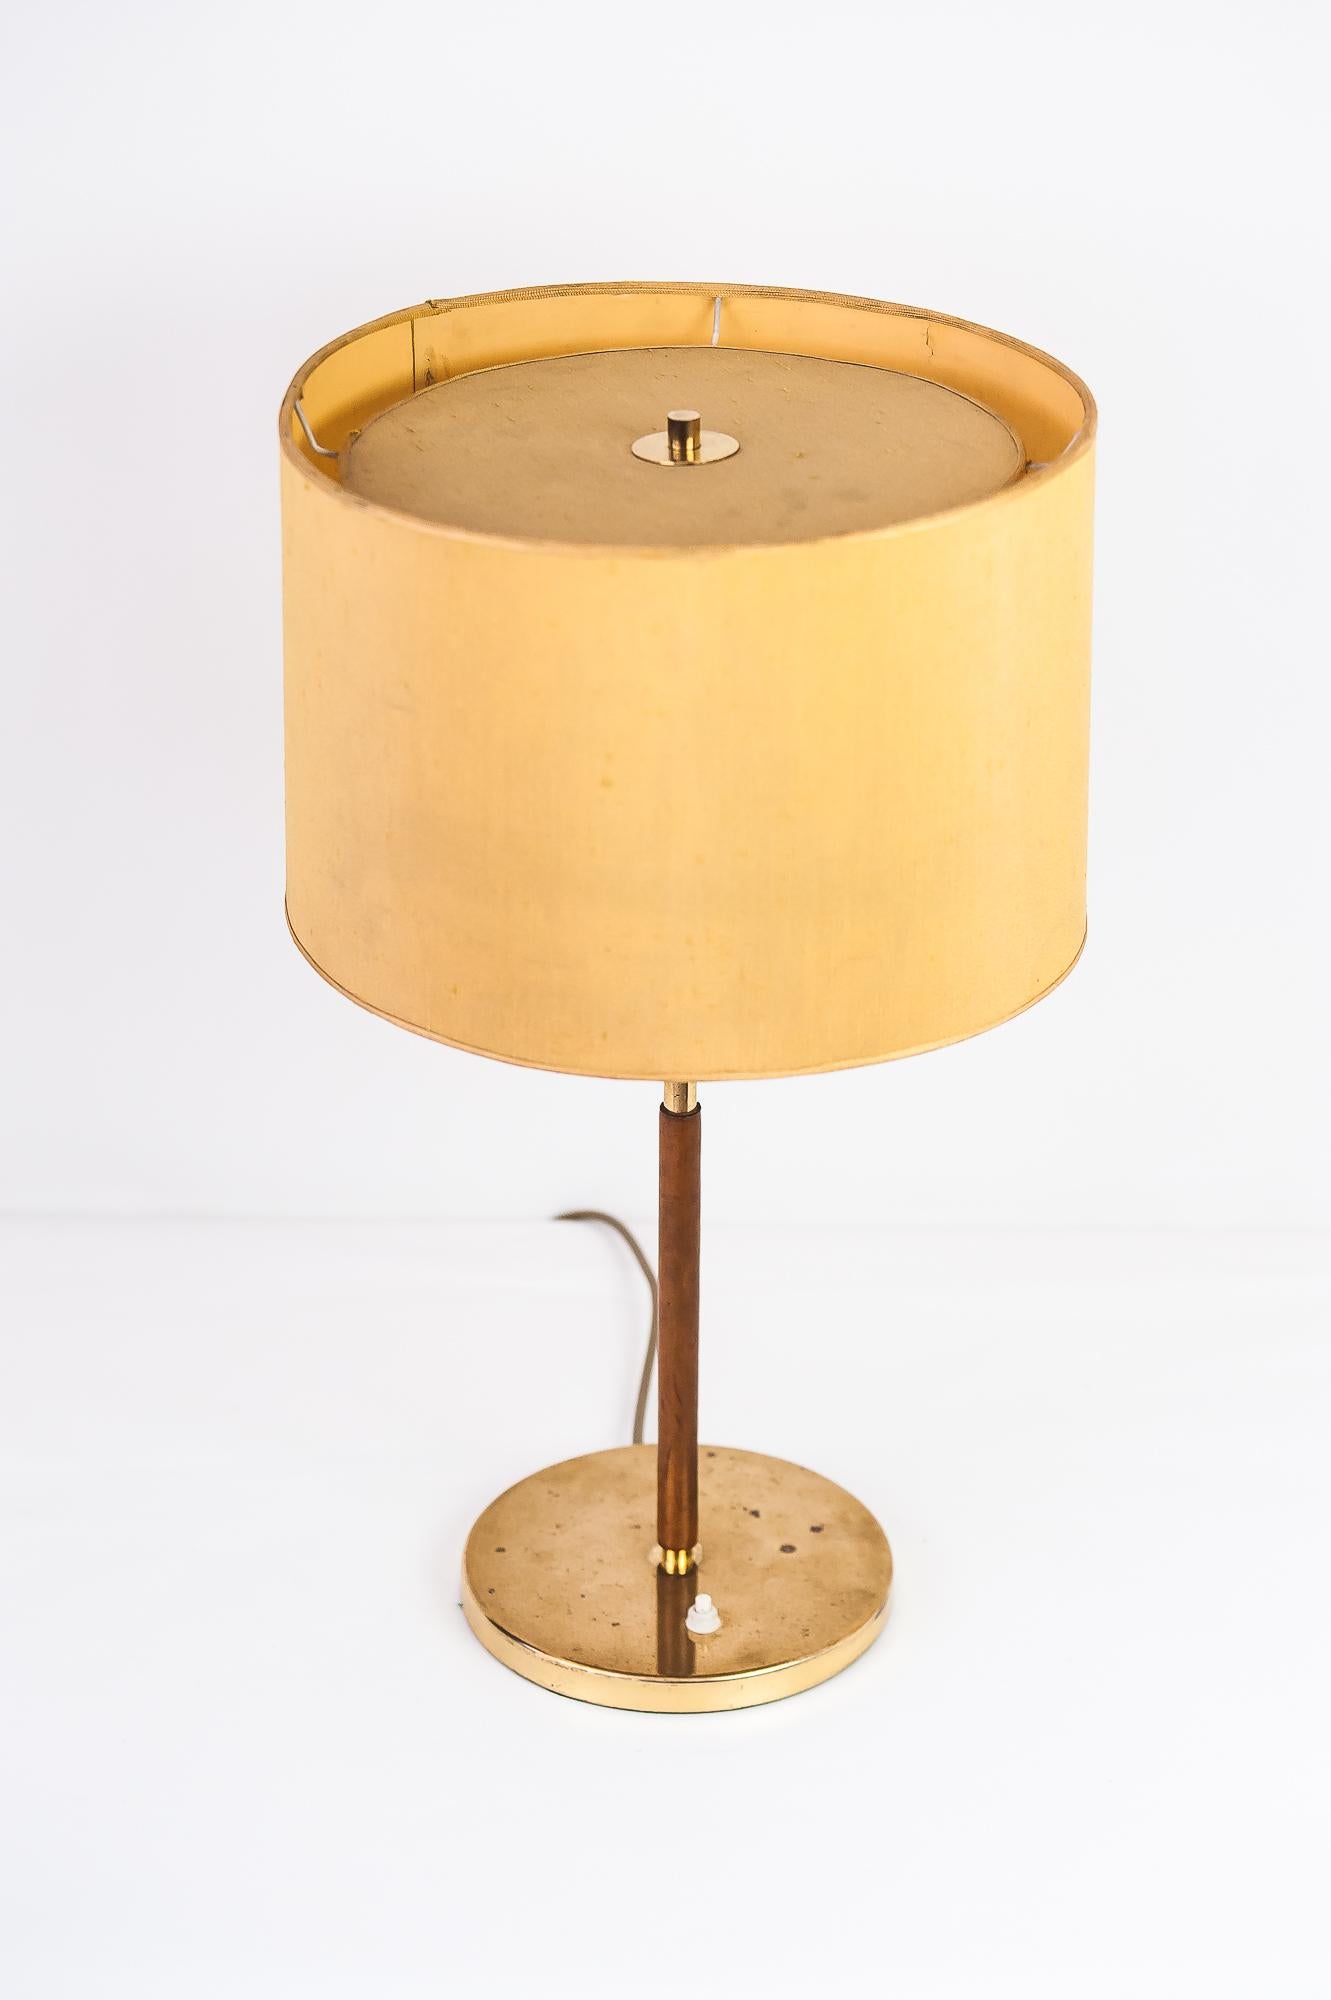 Kalmar table lamps with leather covered stem and yellow shade, Austria, 1950s.
The shade are not in a excellent condition, but it is original.
Original condition.